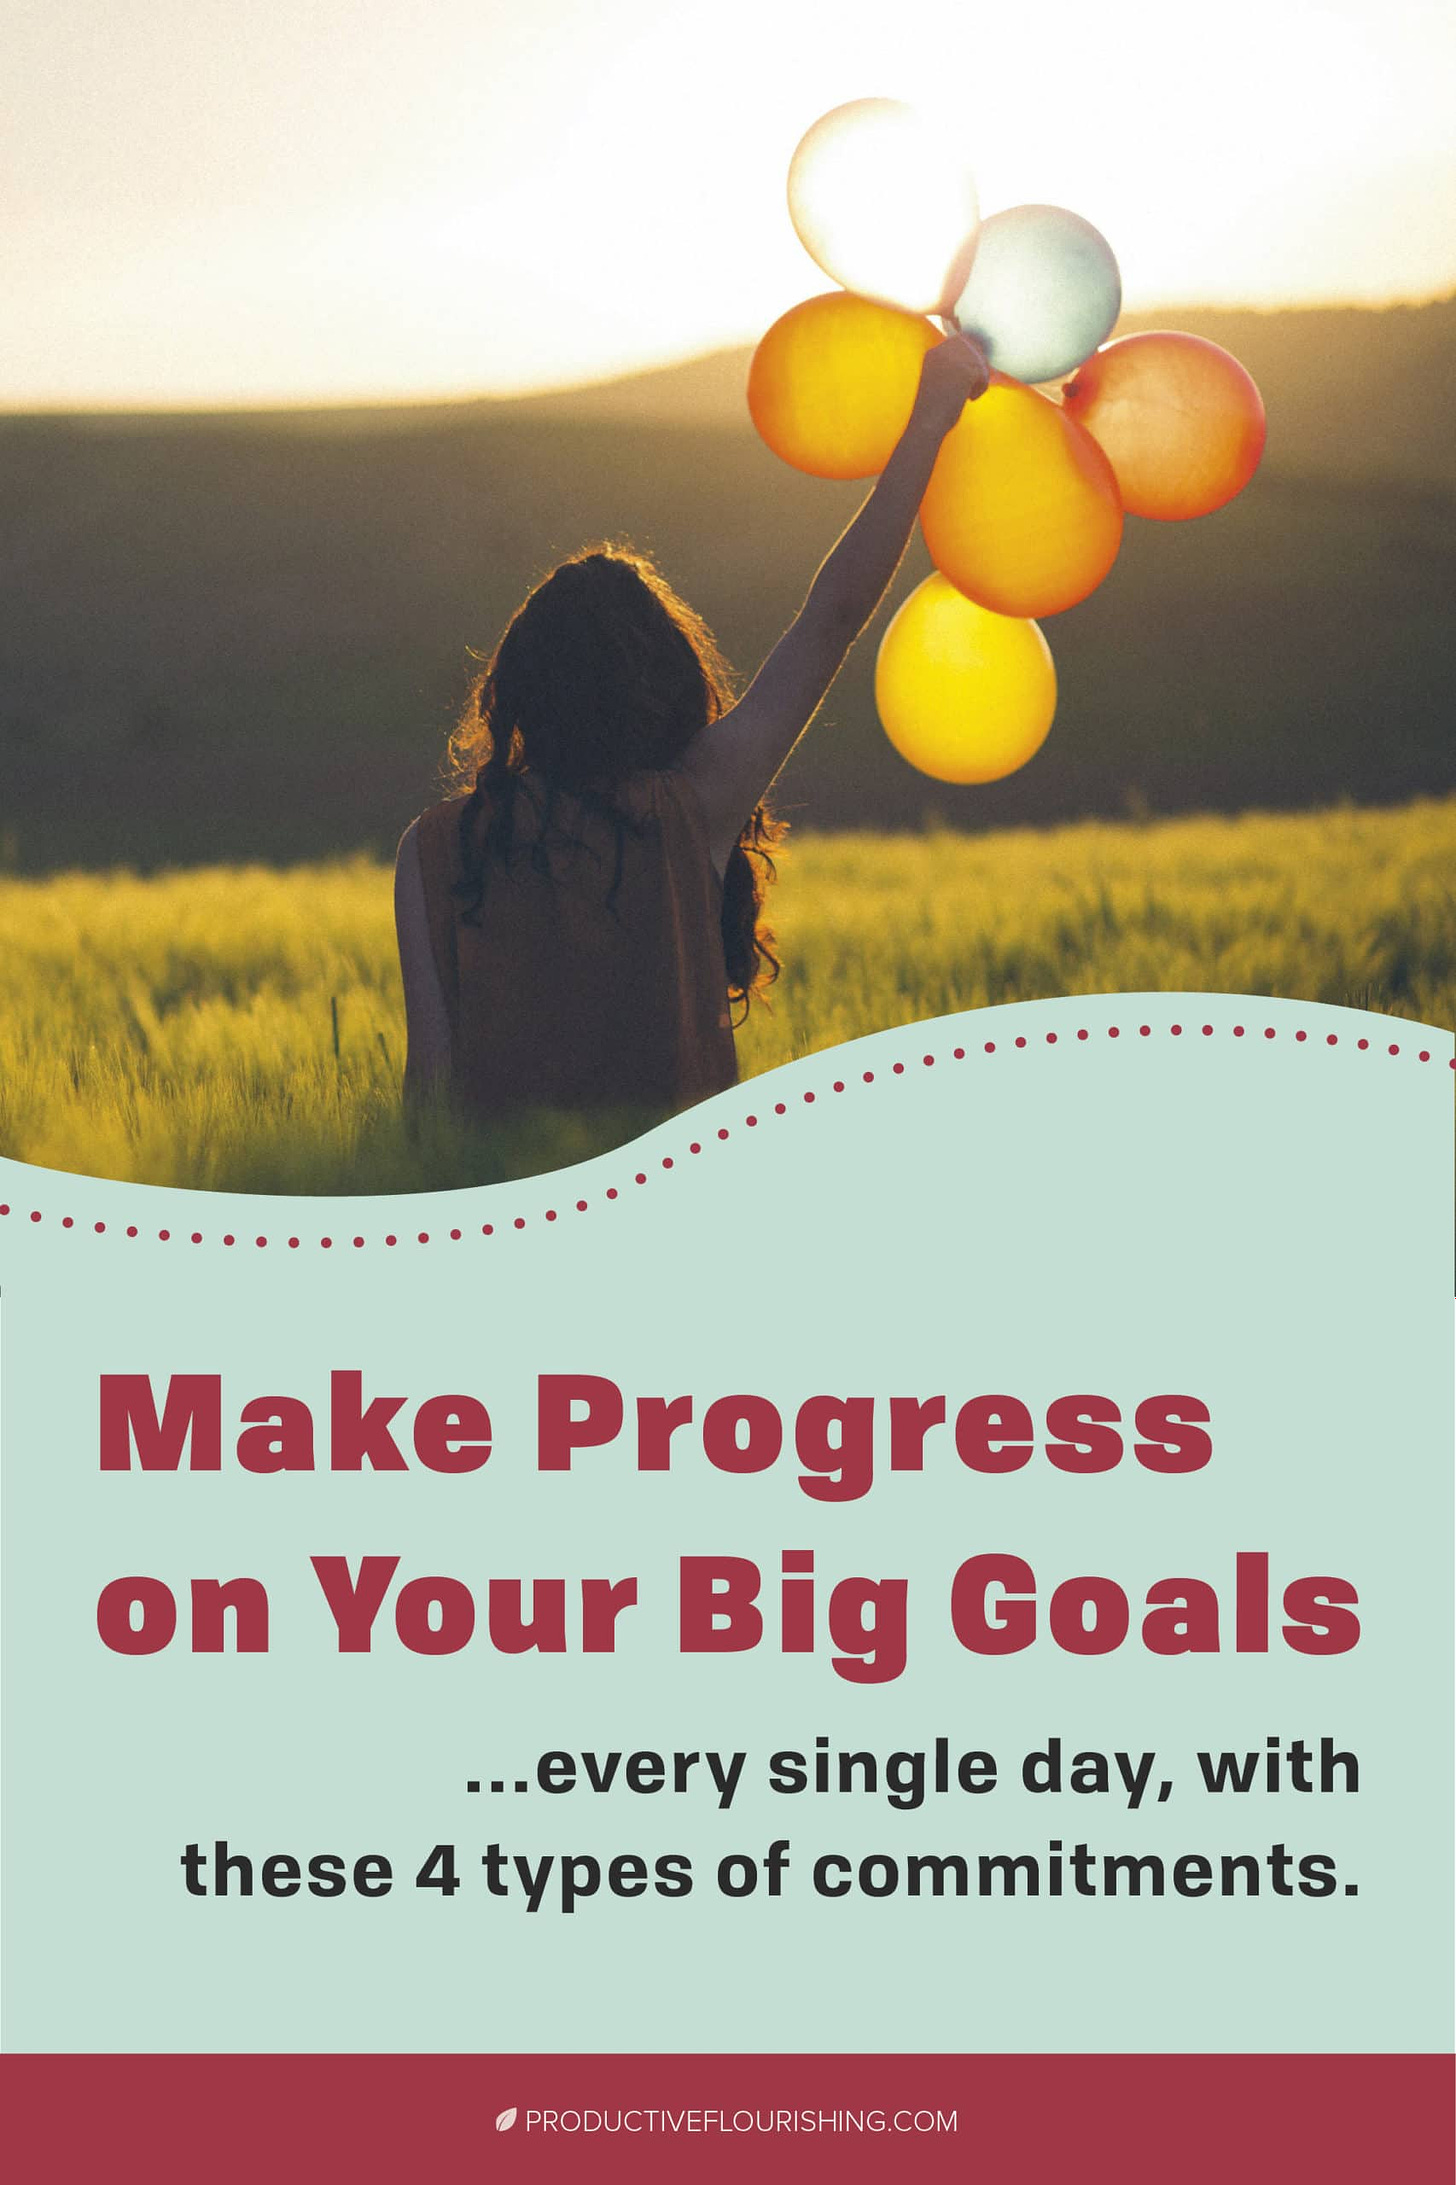 4 types of every day commitments that will be sure to make progress on your biggest goals. Learn how to make the day count with these simple 